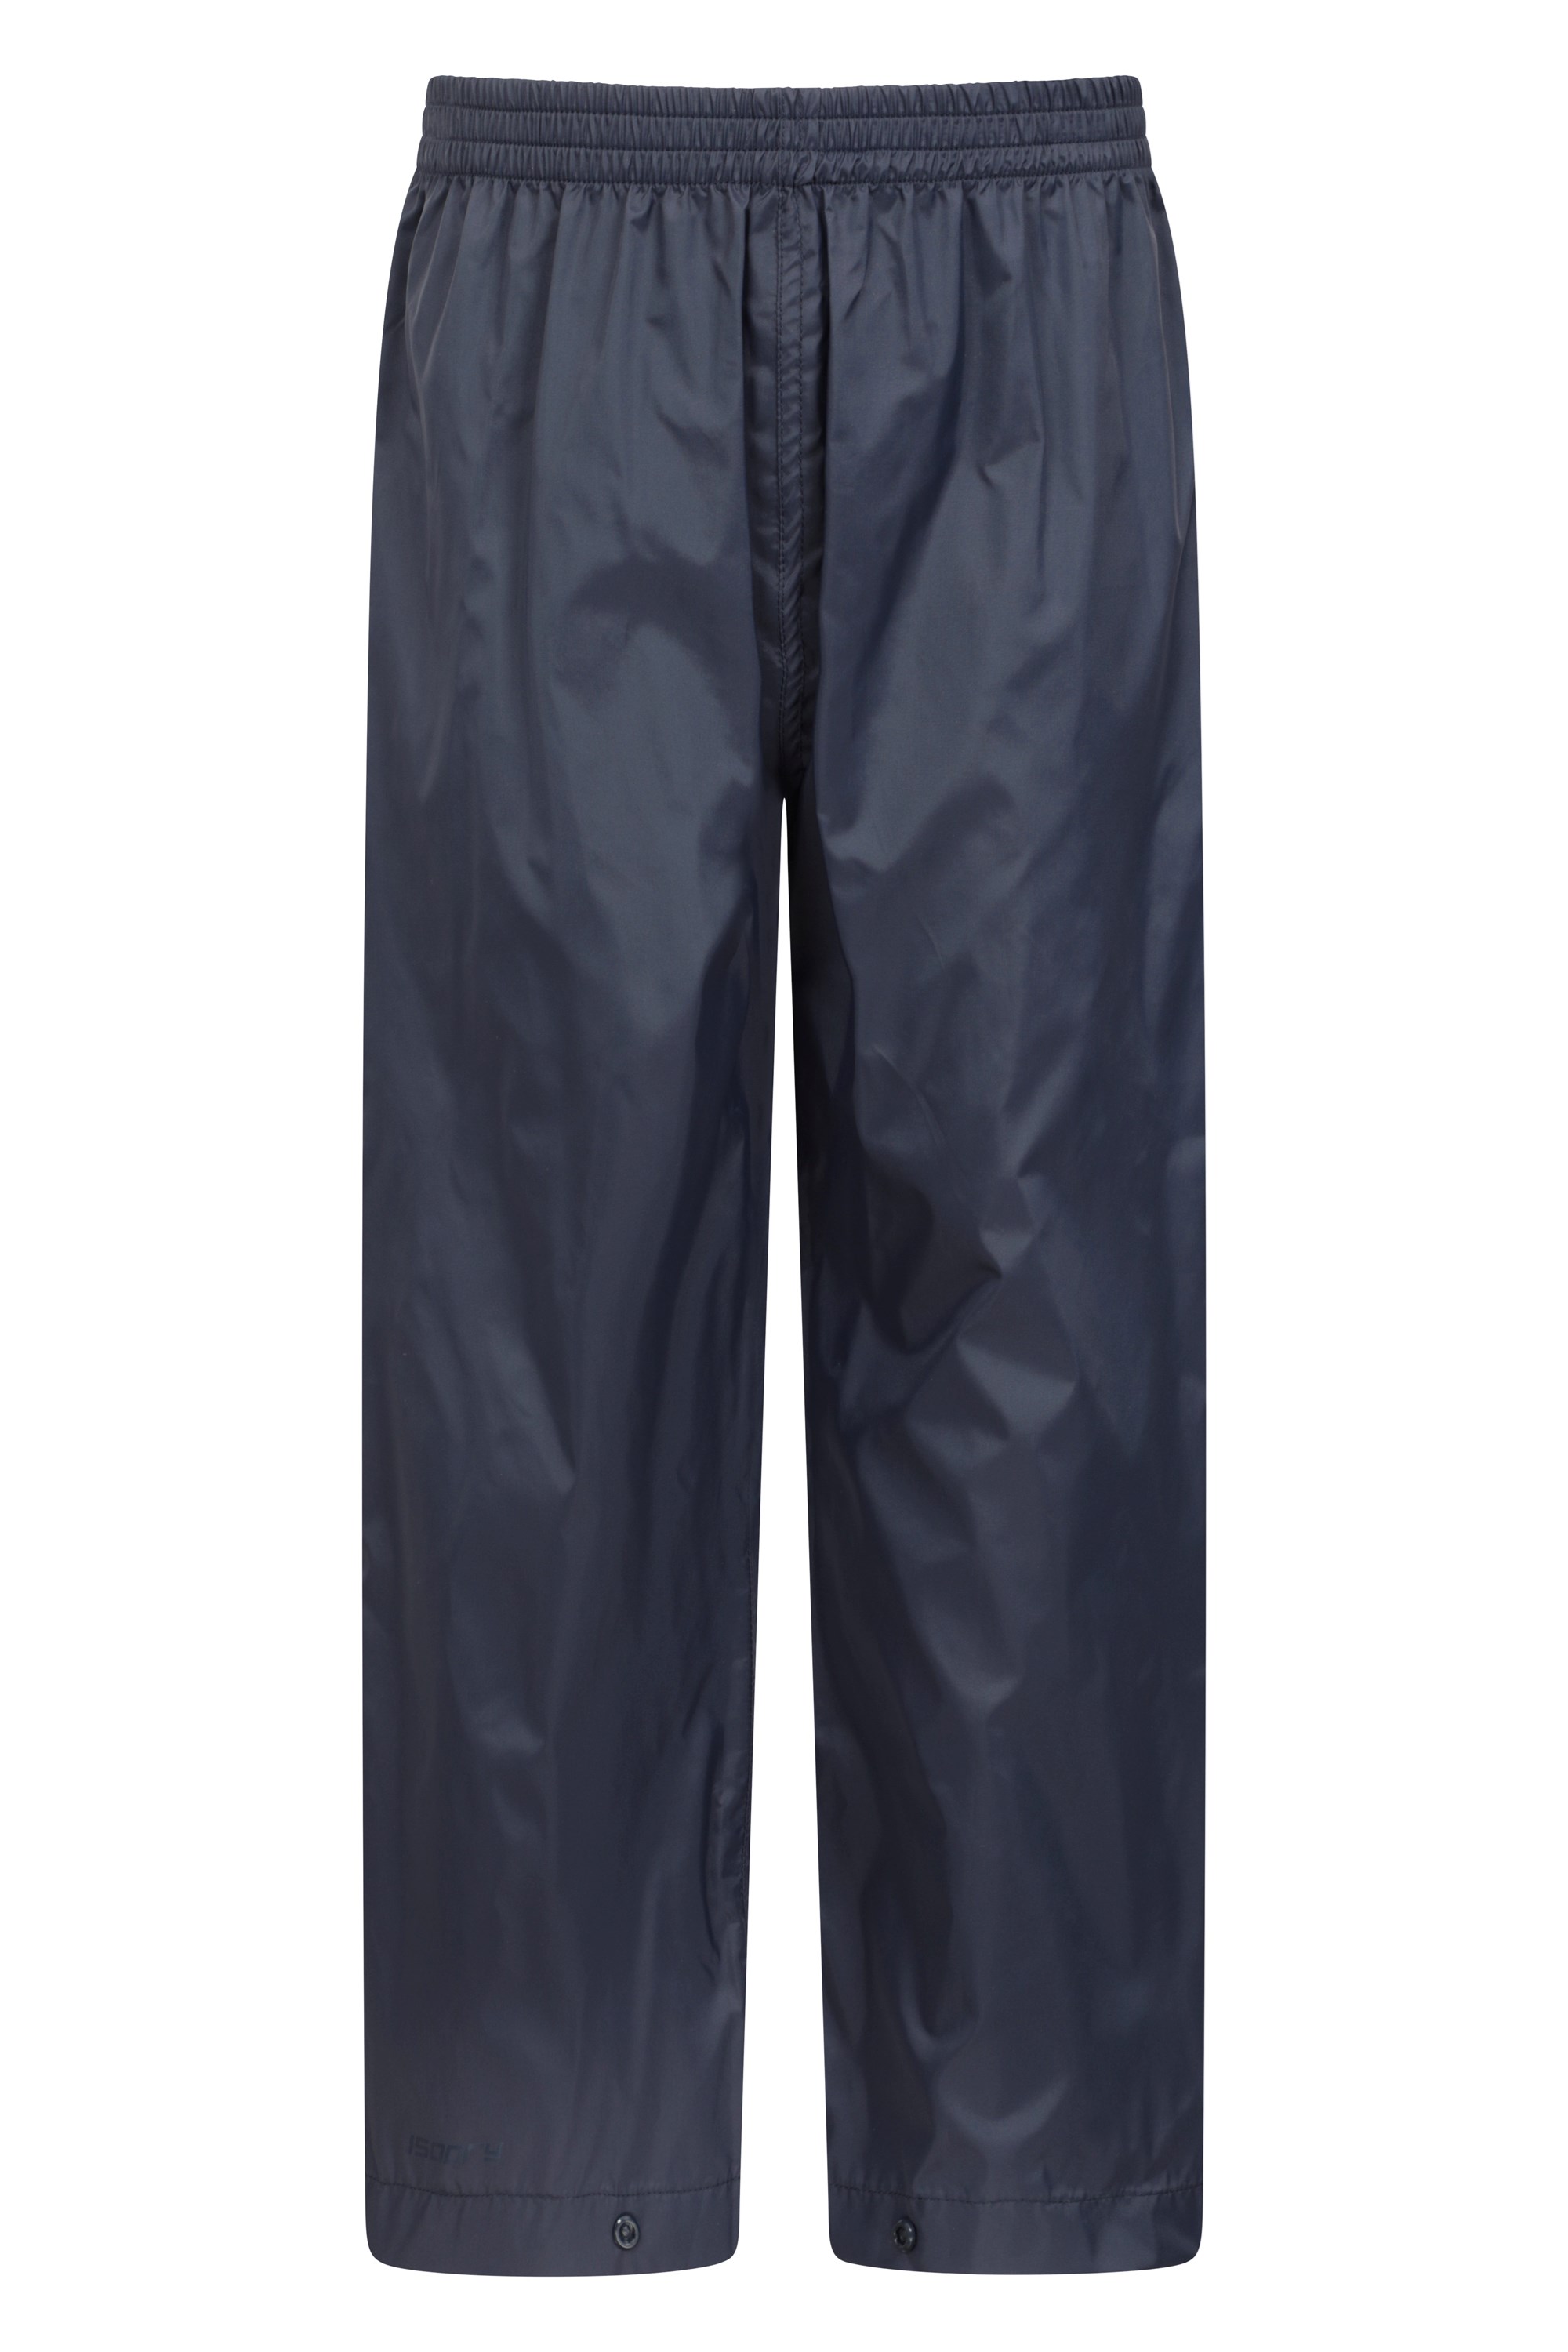 Boys' Waterproof Trousers | Outdoor Clothing | H&M GB